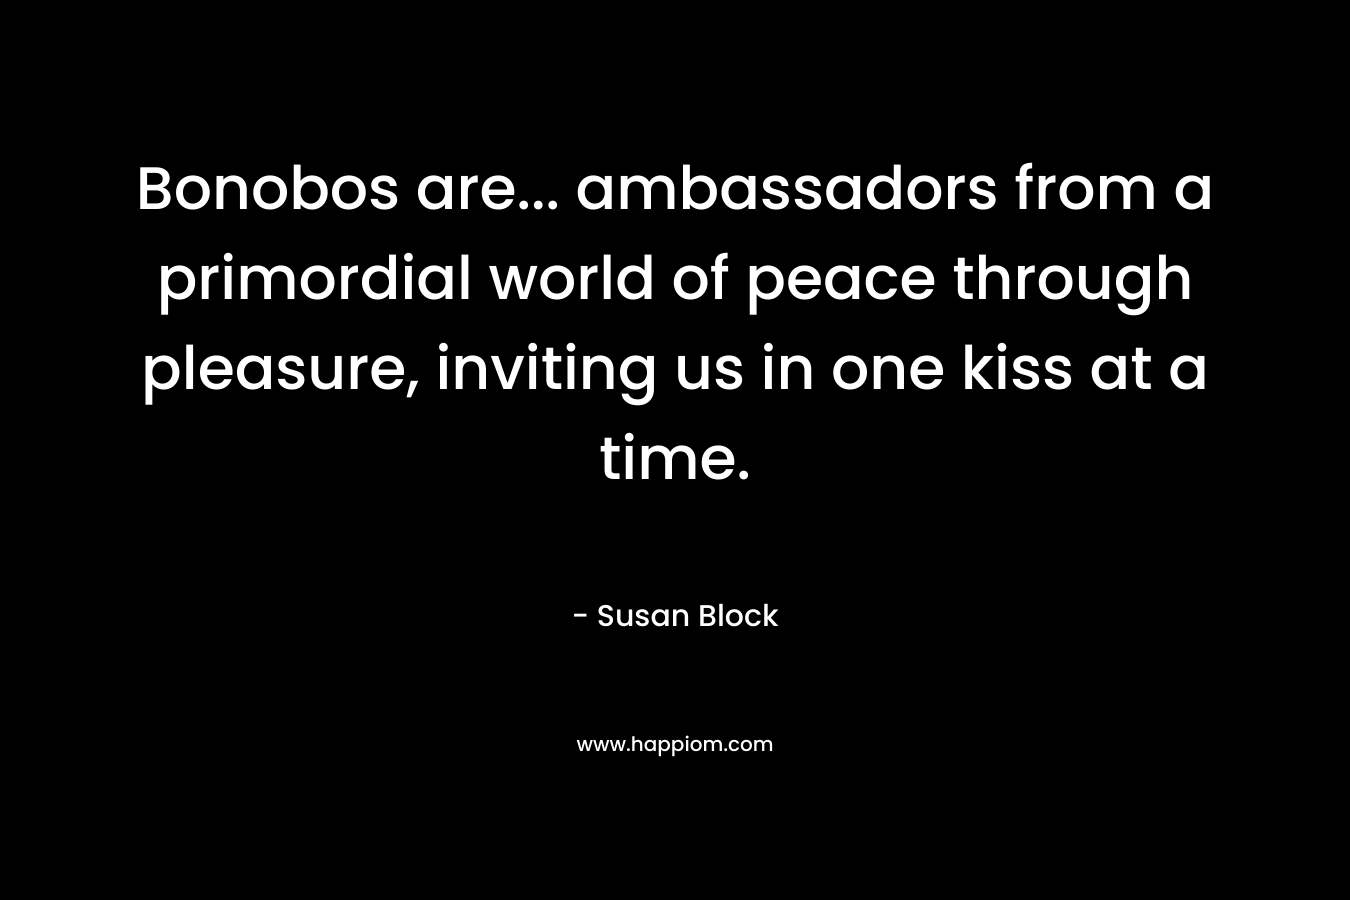 Bonobos are… ambassadors from a primordial world of peace through pleasure, inviting us in one kiss at a time. – Susan Block